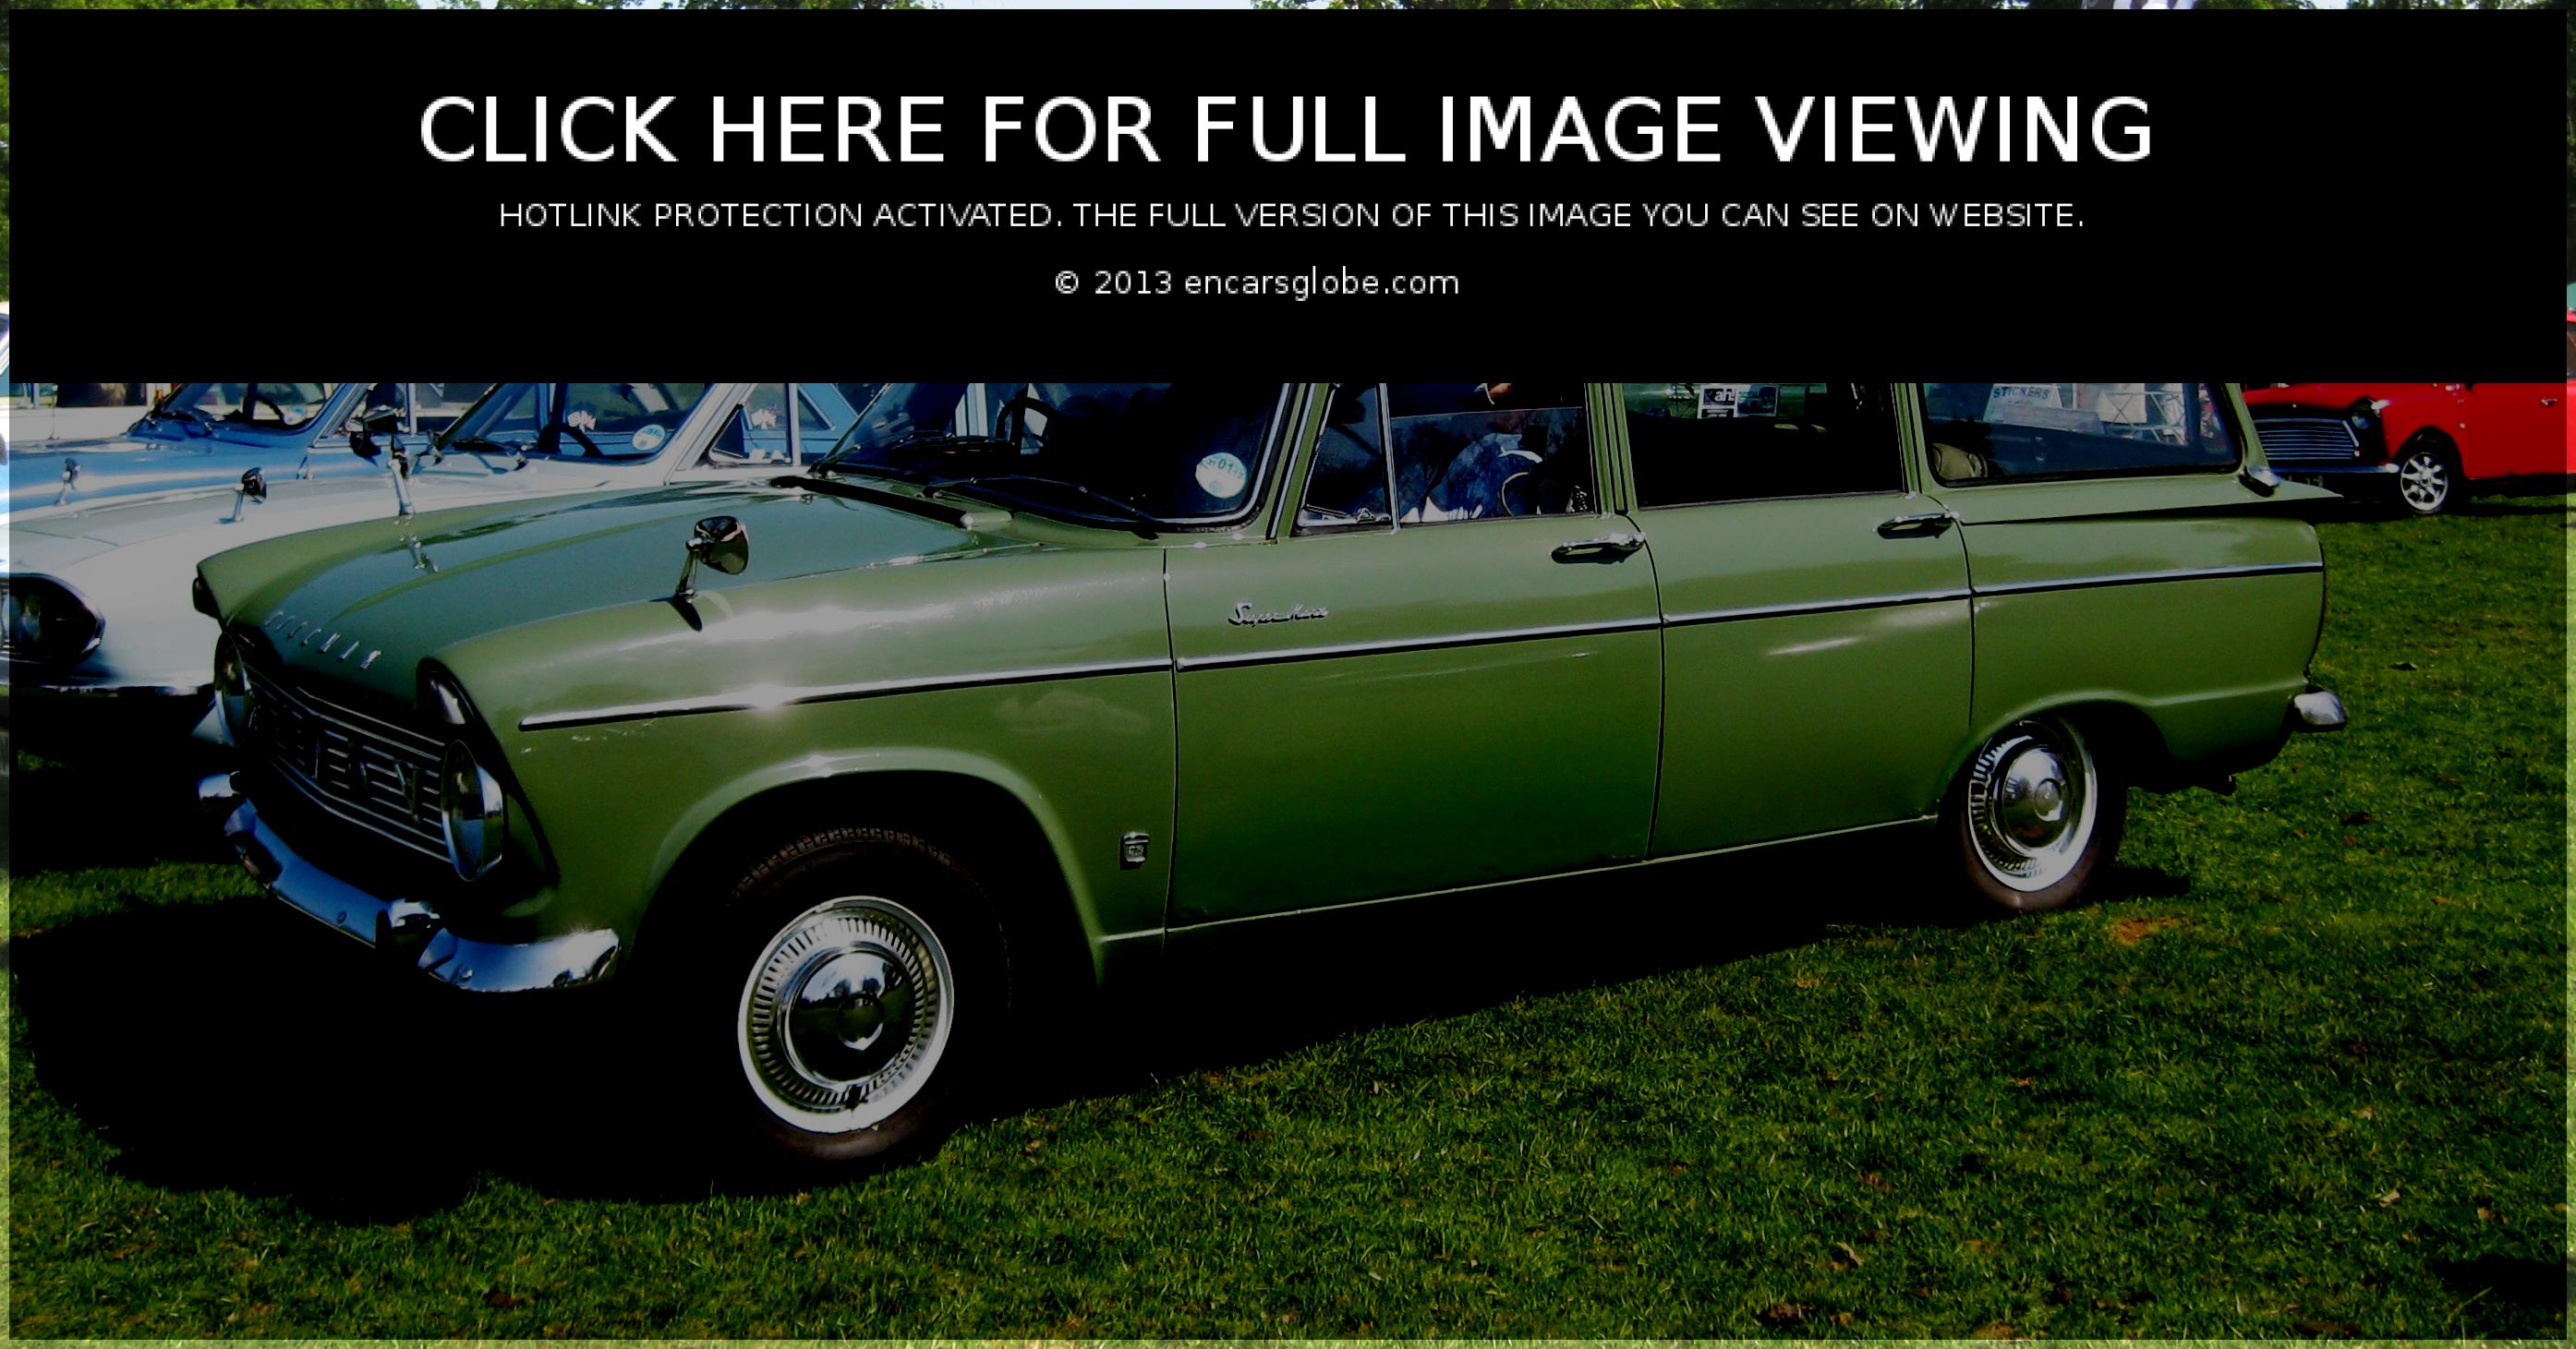 Hillman Imp 998 GT Photo Gallery: Photo #11 out of 10, Image Size ...